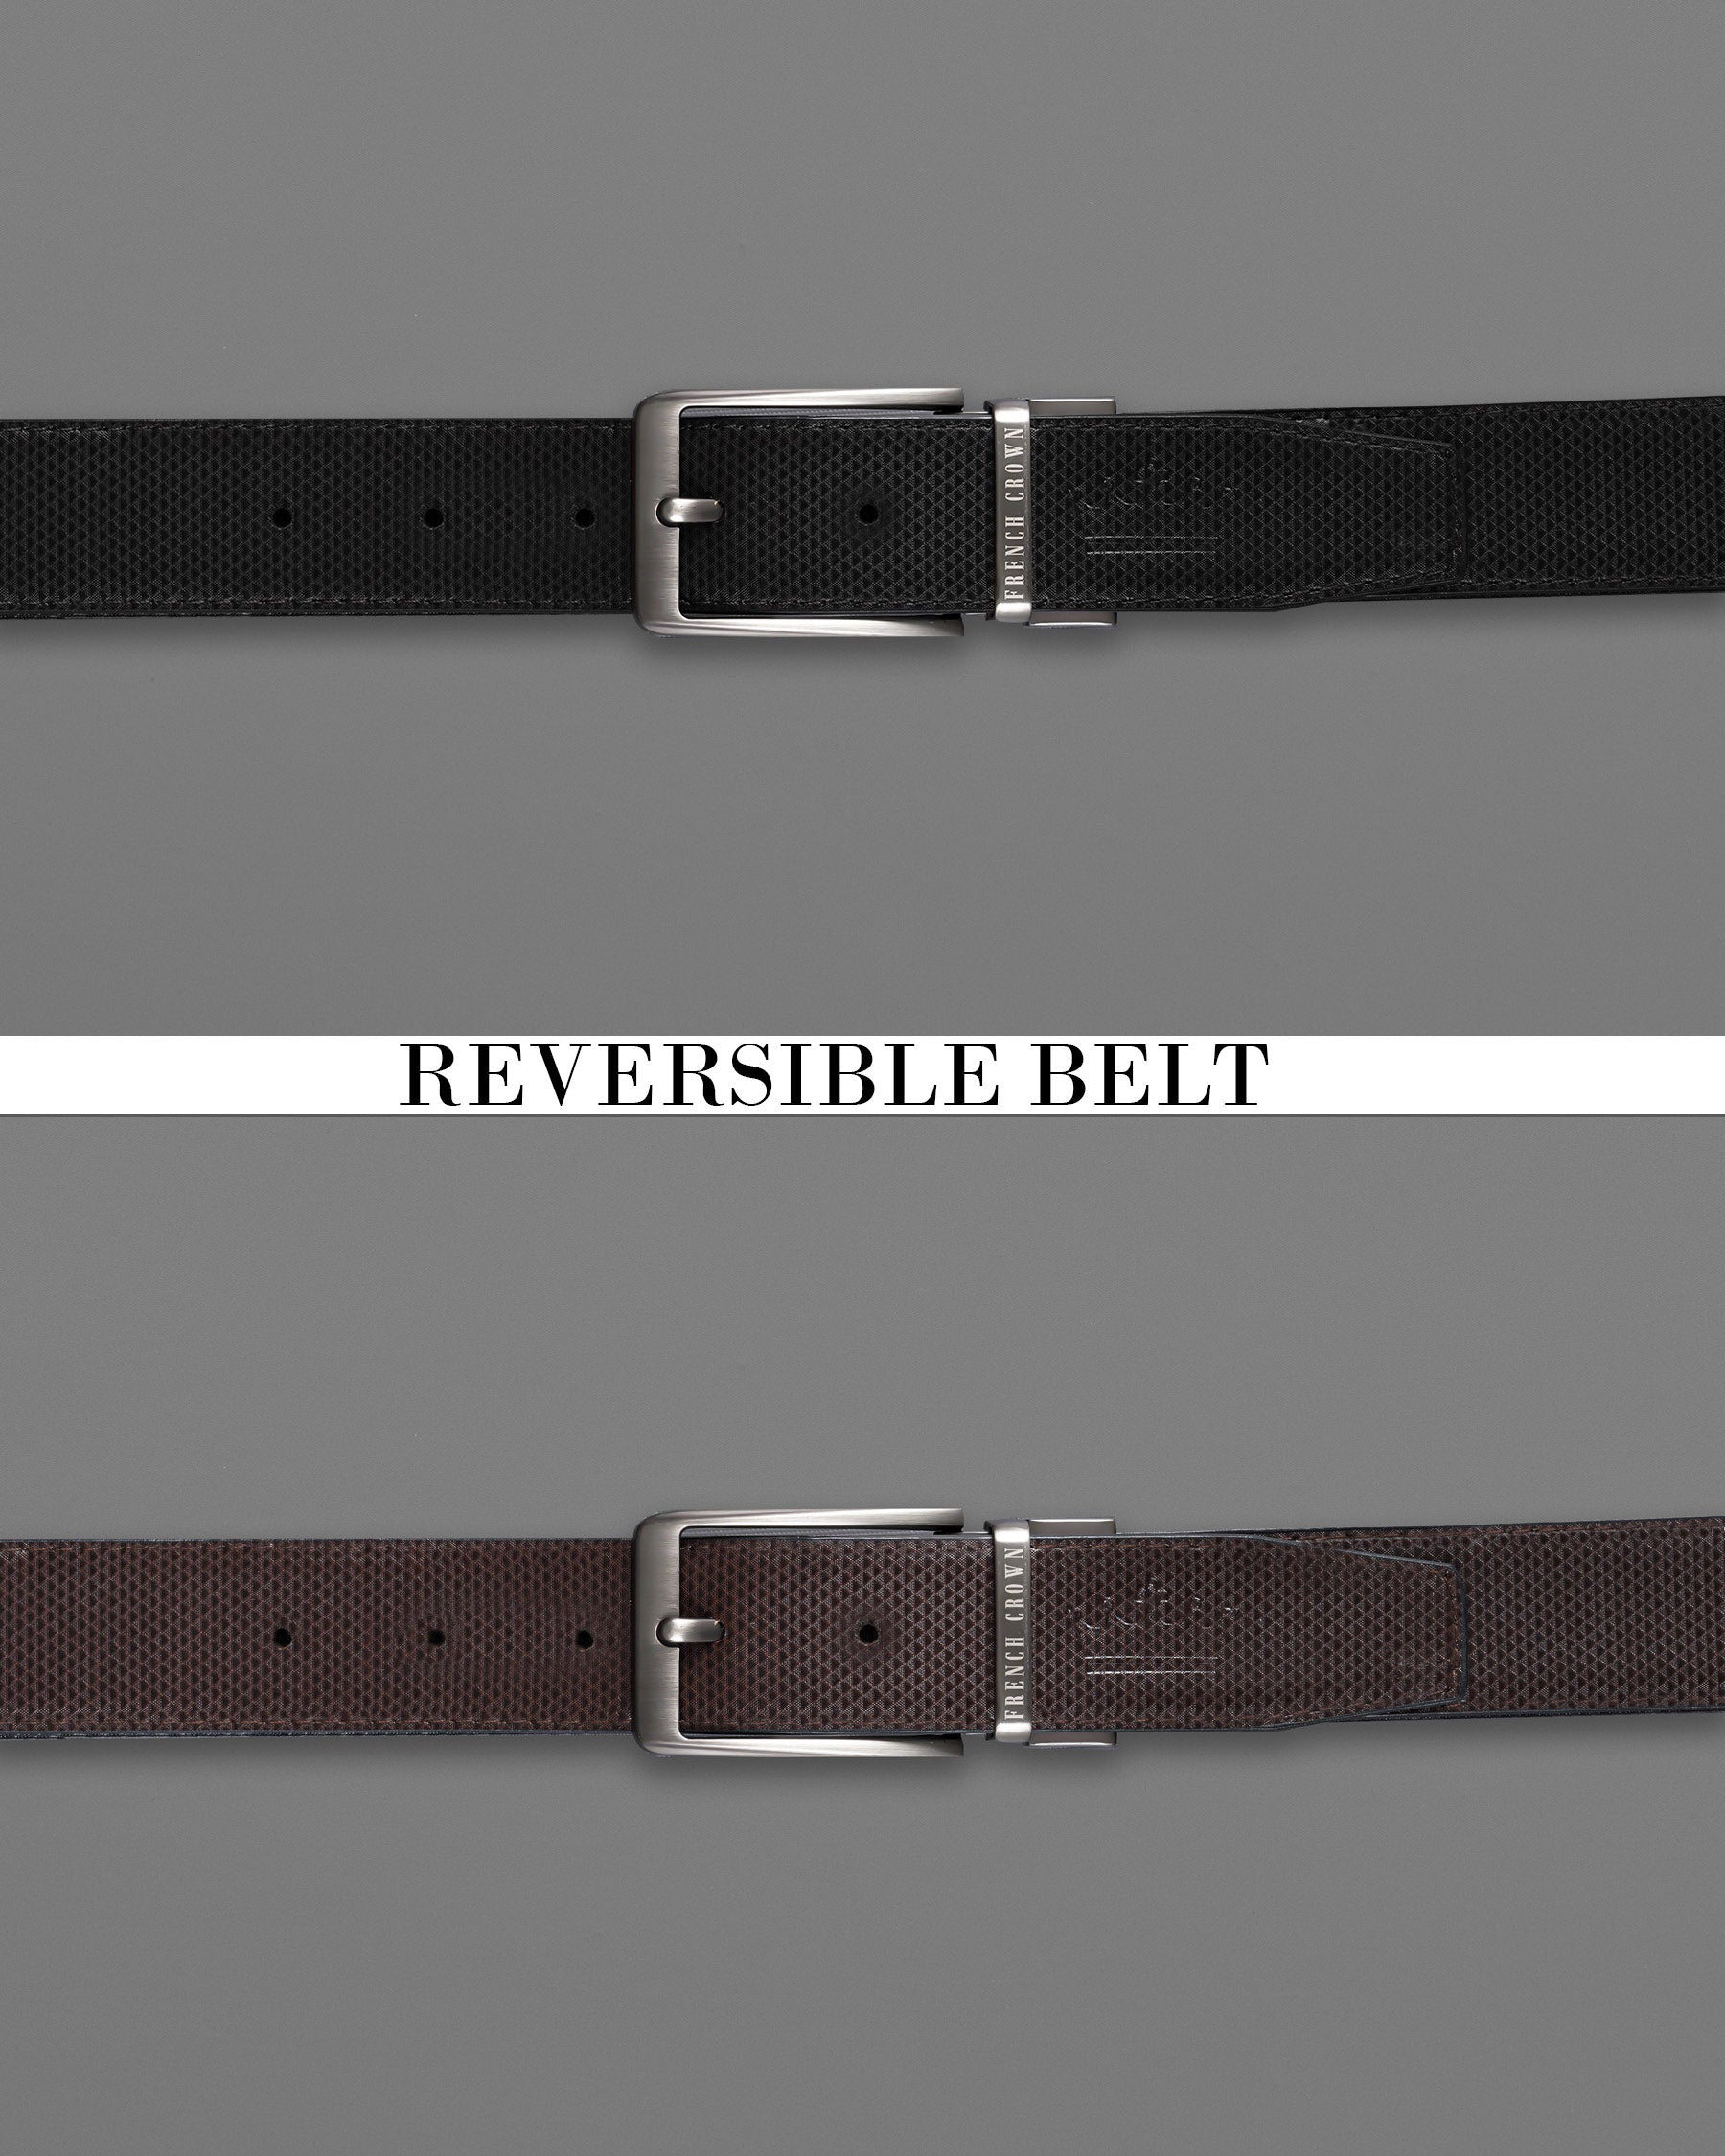 Silver Buckle with Jade Black and Brown Leather Free Handcrafted Reversible Belt BT058-28, BT058-30, BT058-32, BT058-34, BT058-36, BT058-38